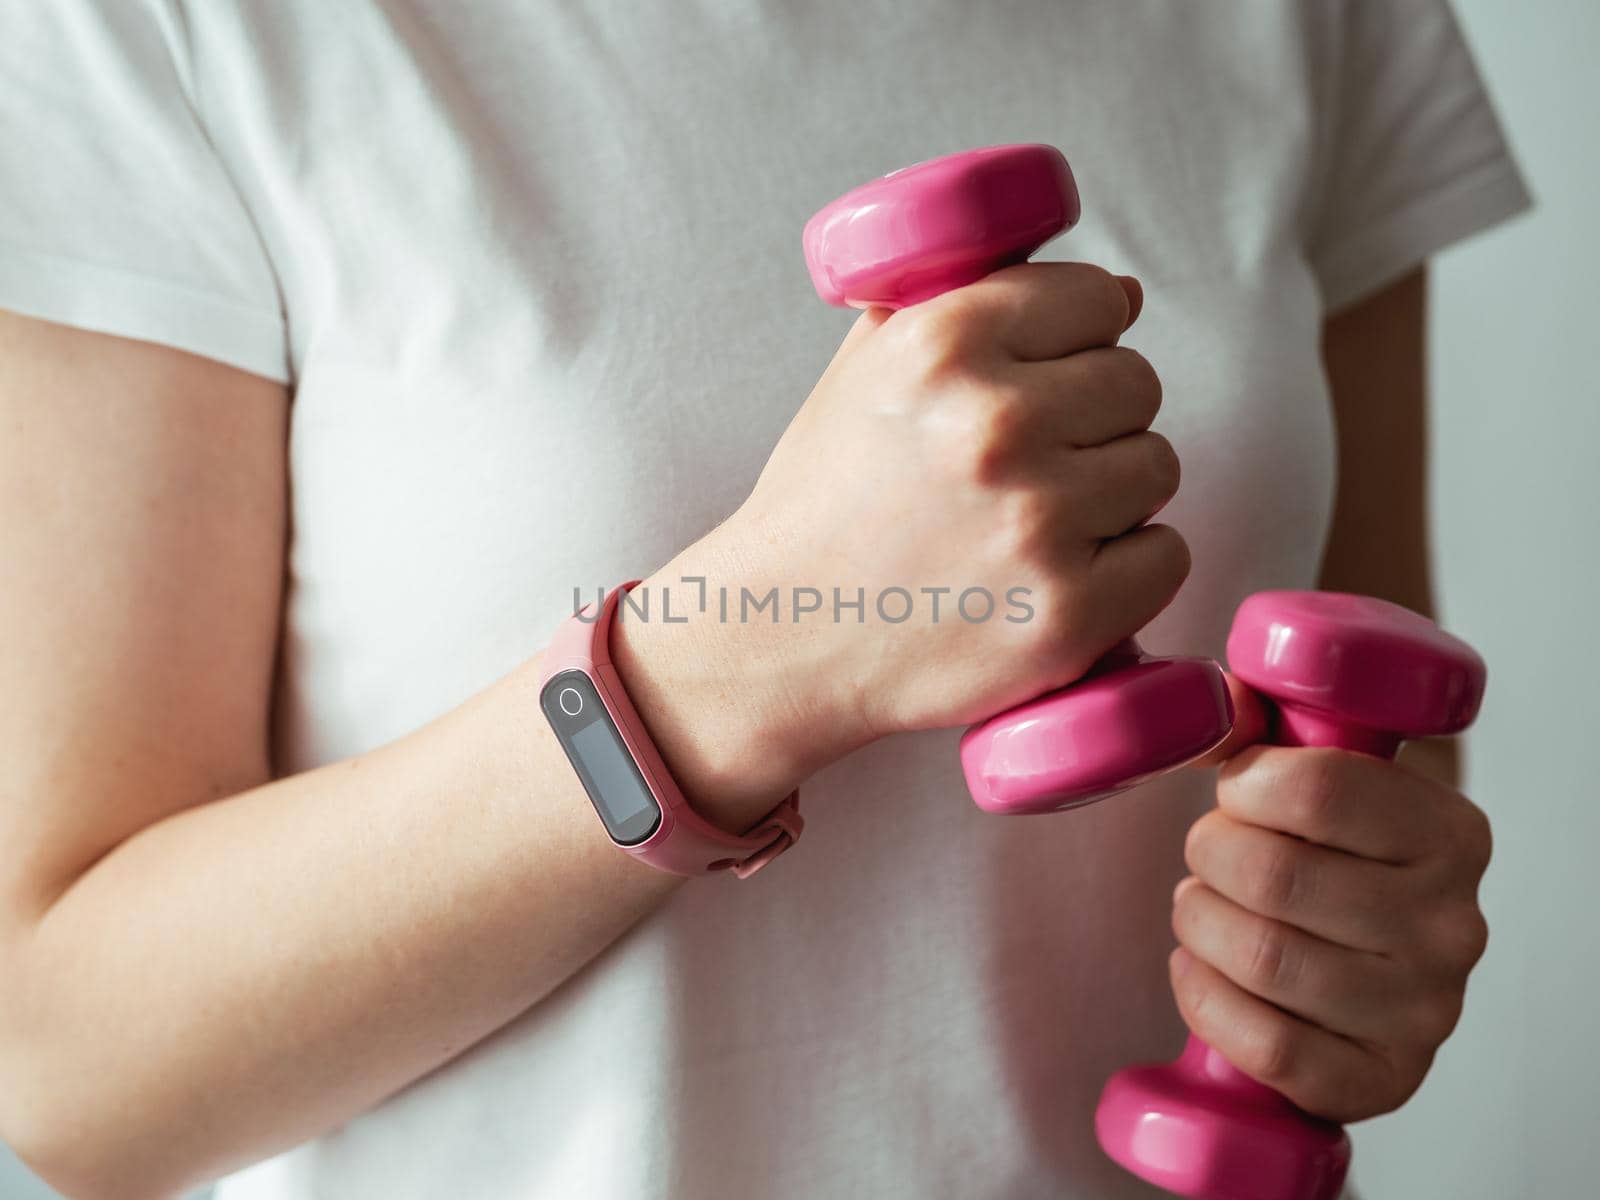 Woman with fitness tracker and barbells by fascinadora